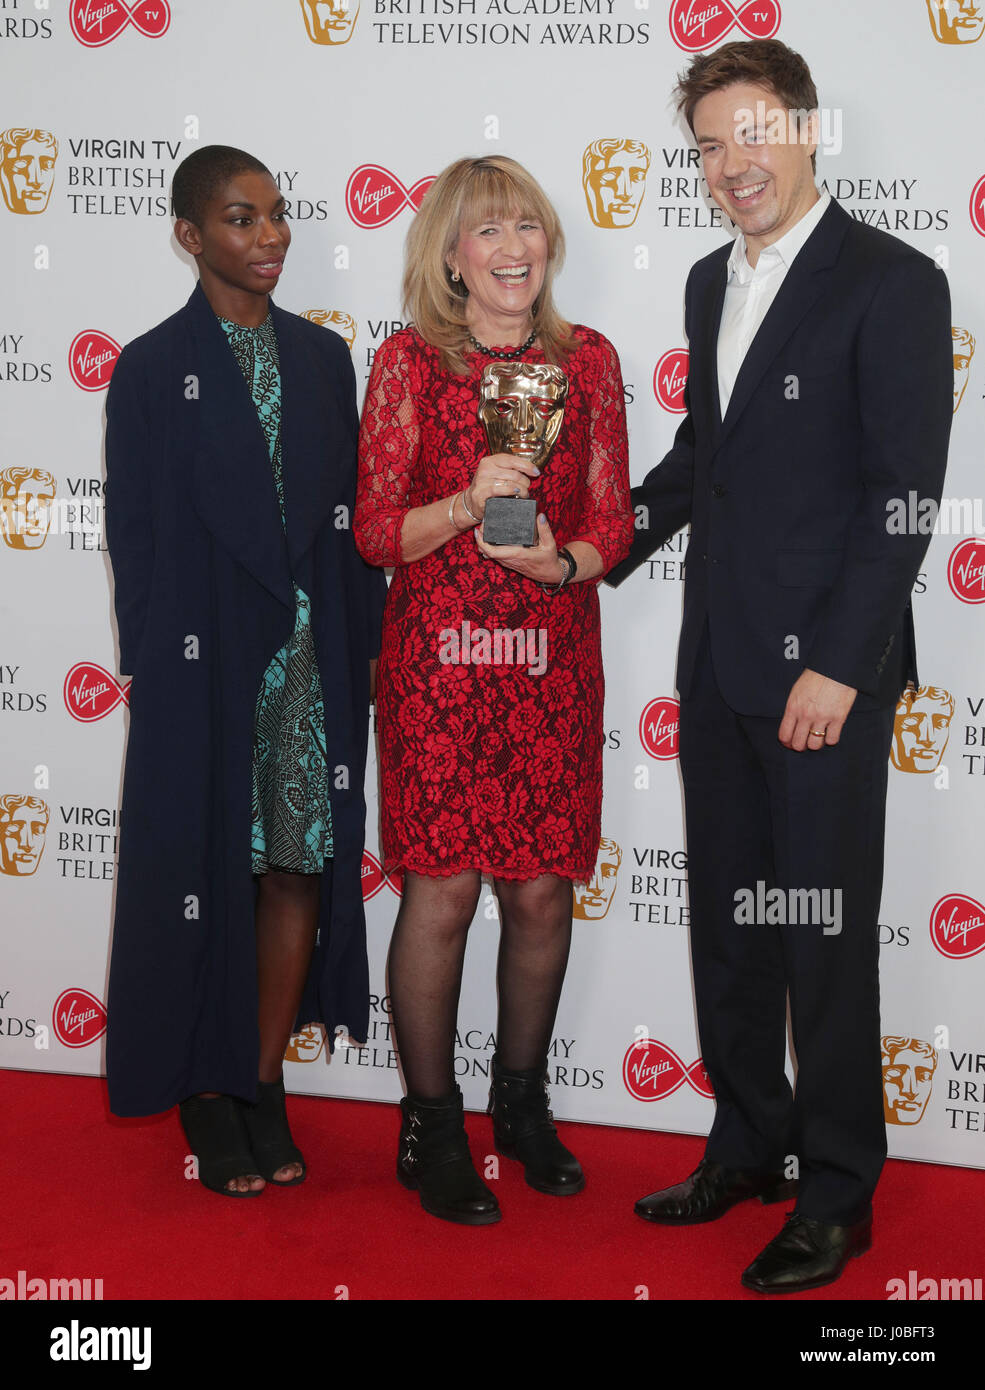 Jane Lush (centre), BAFTA Chair of the Academy, with Andrew Buchan and Michaela Coel during the TV Bafta nominations at BAFTA, in central London. Stock Photo